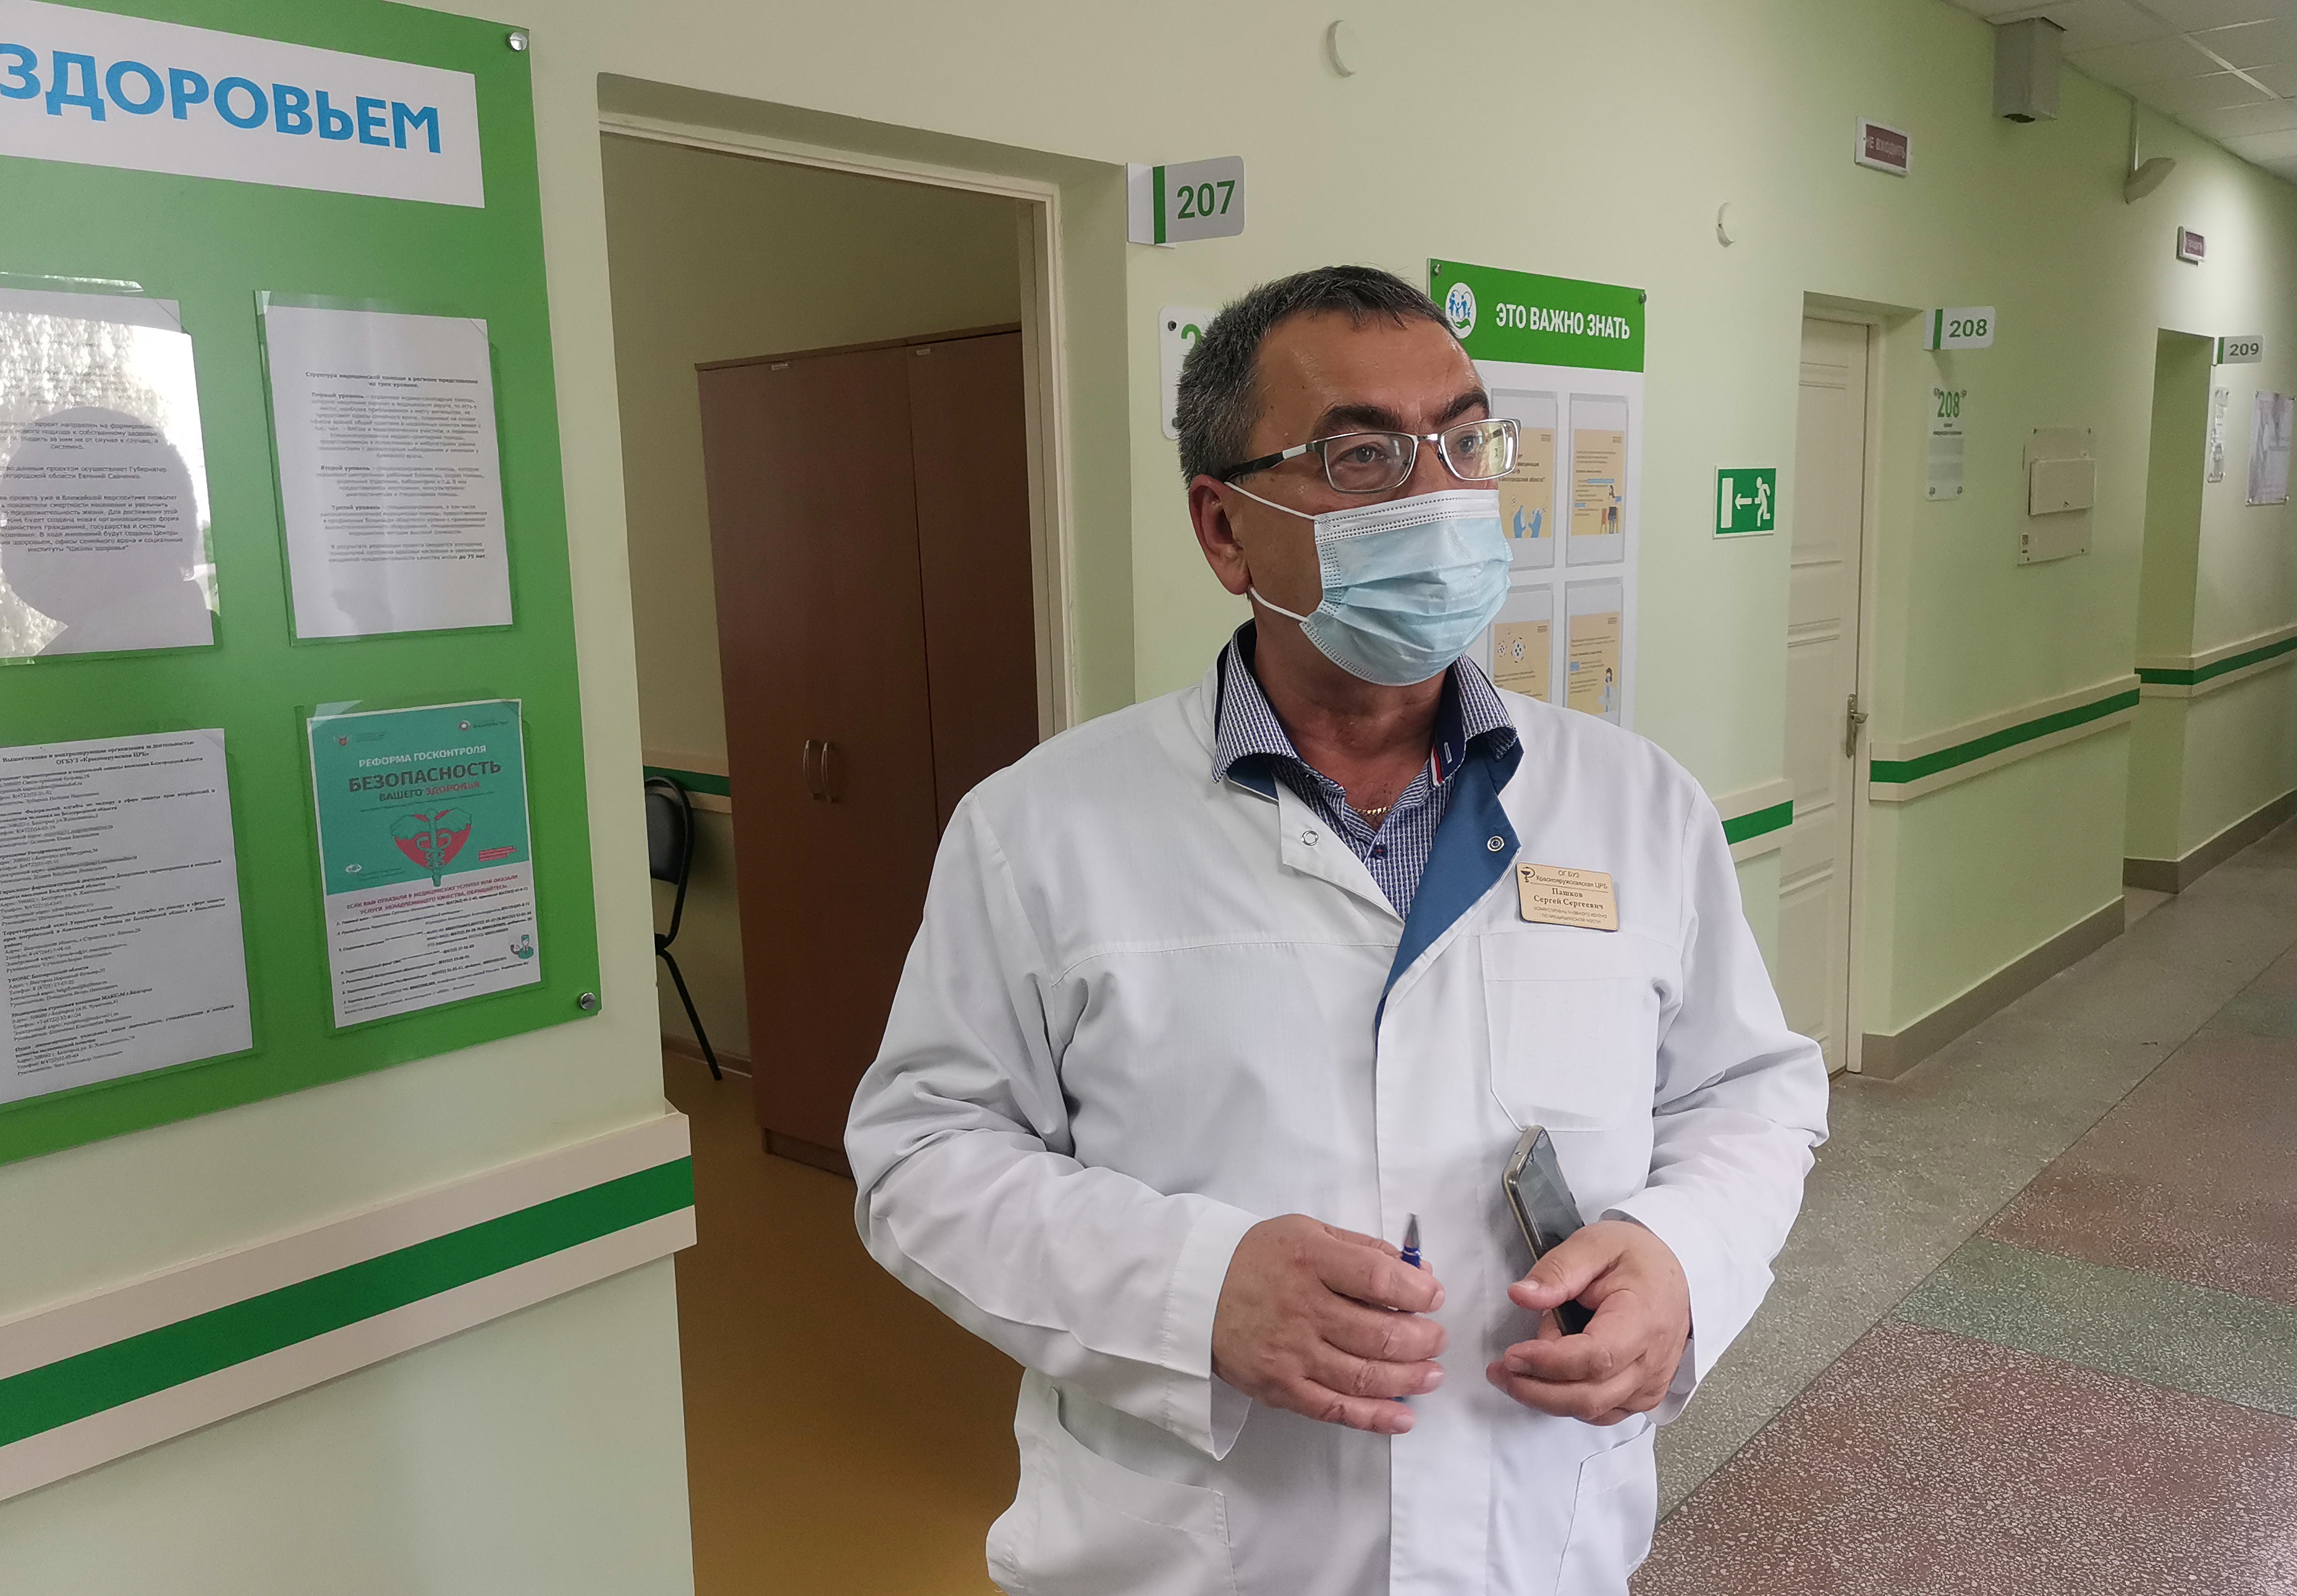 Sergei Pashkov, deputy chief physician of a district hospital, is pictured in Belgorod Region